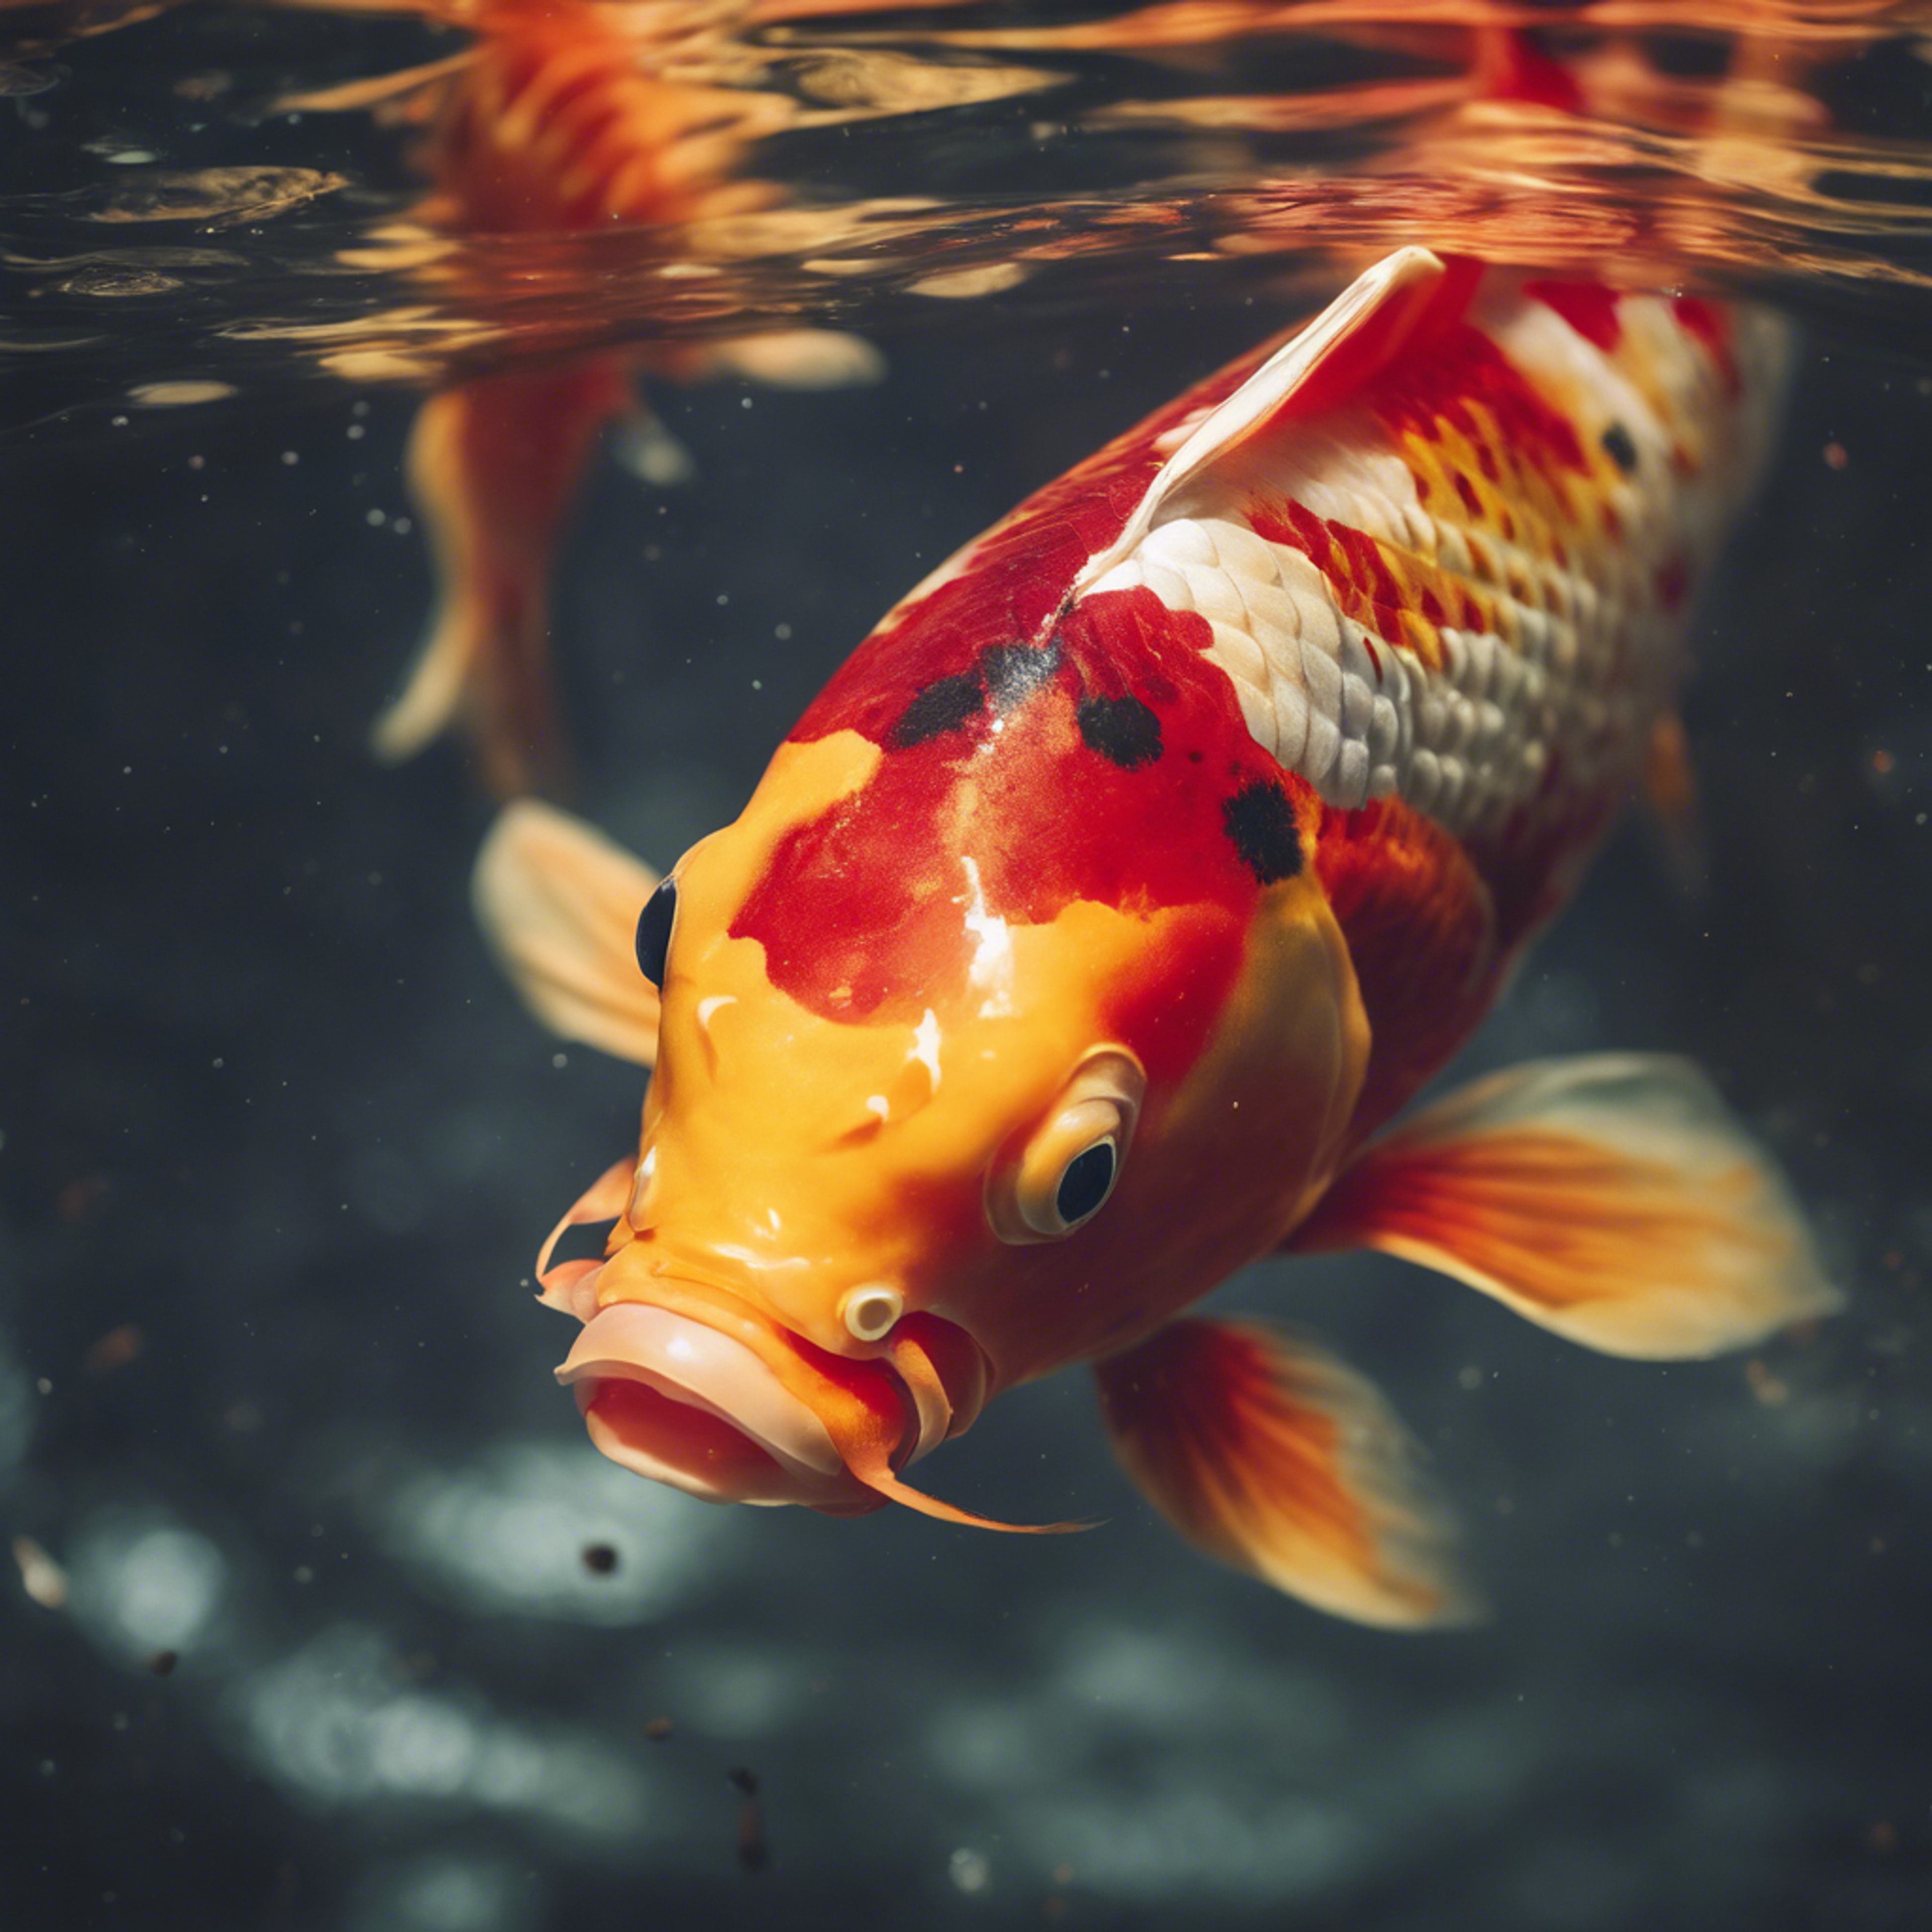 A vibrant red and gold koi fish swimming in a clear pond. טפט[1dfeb98f60cb429caecb]